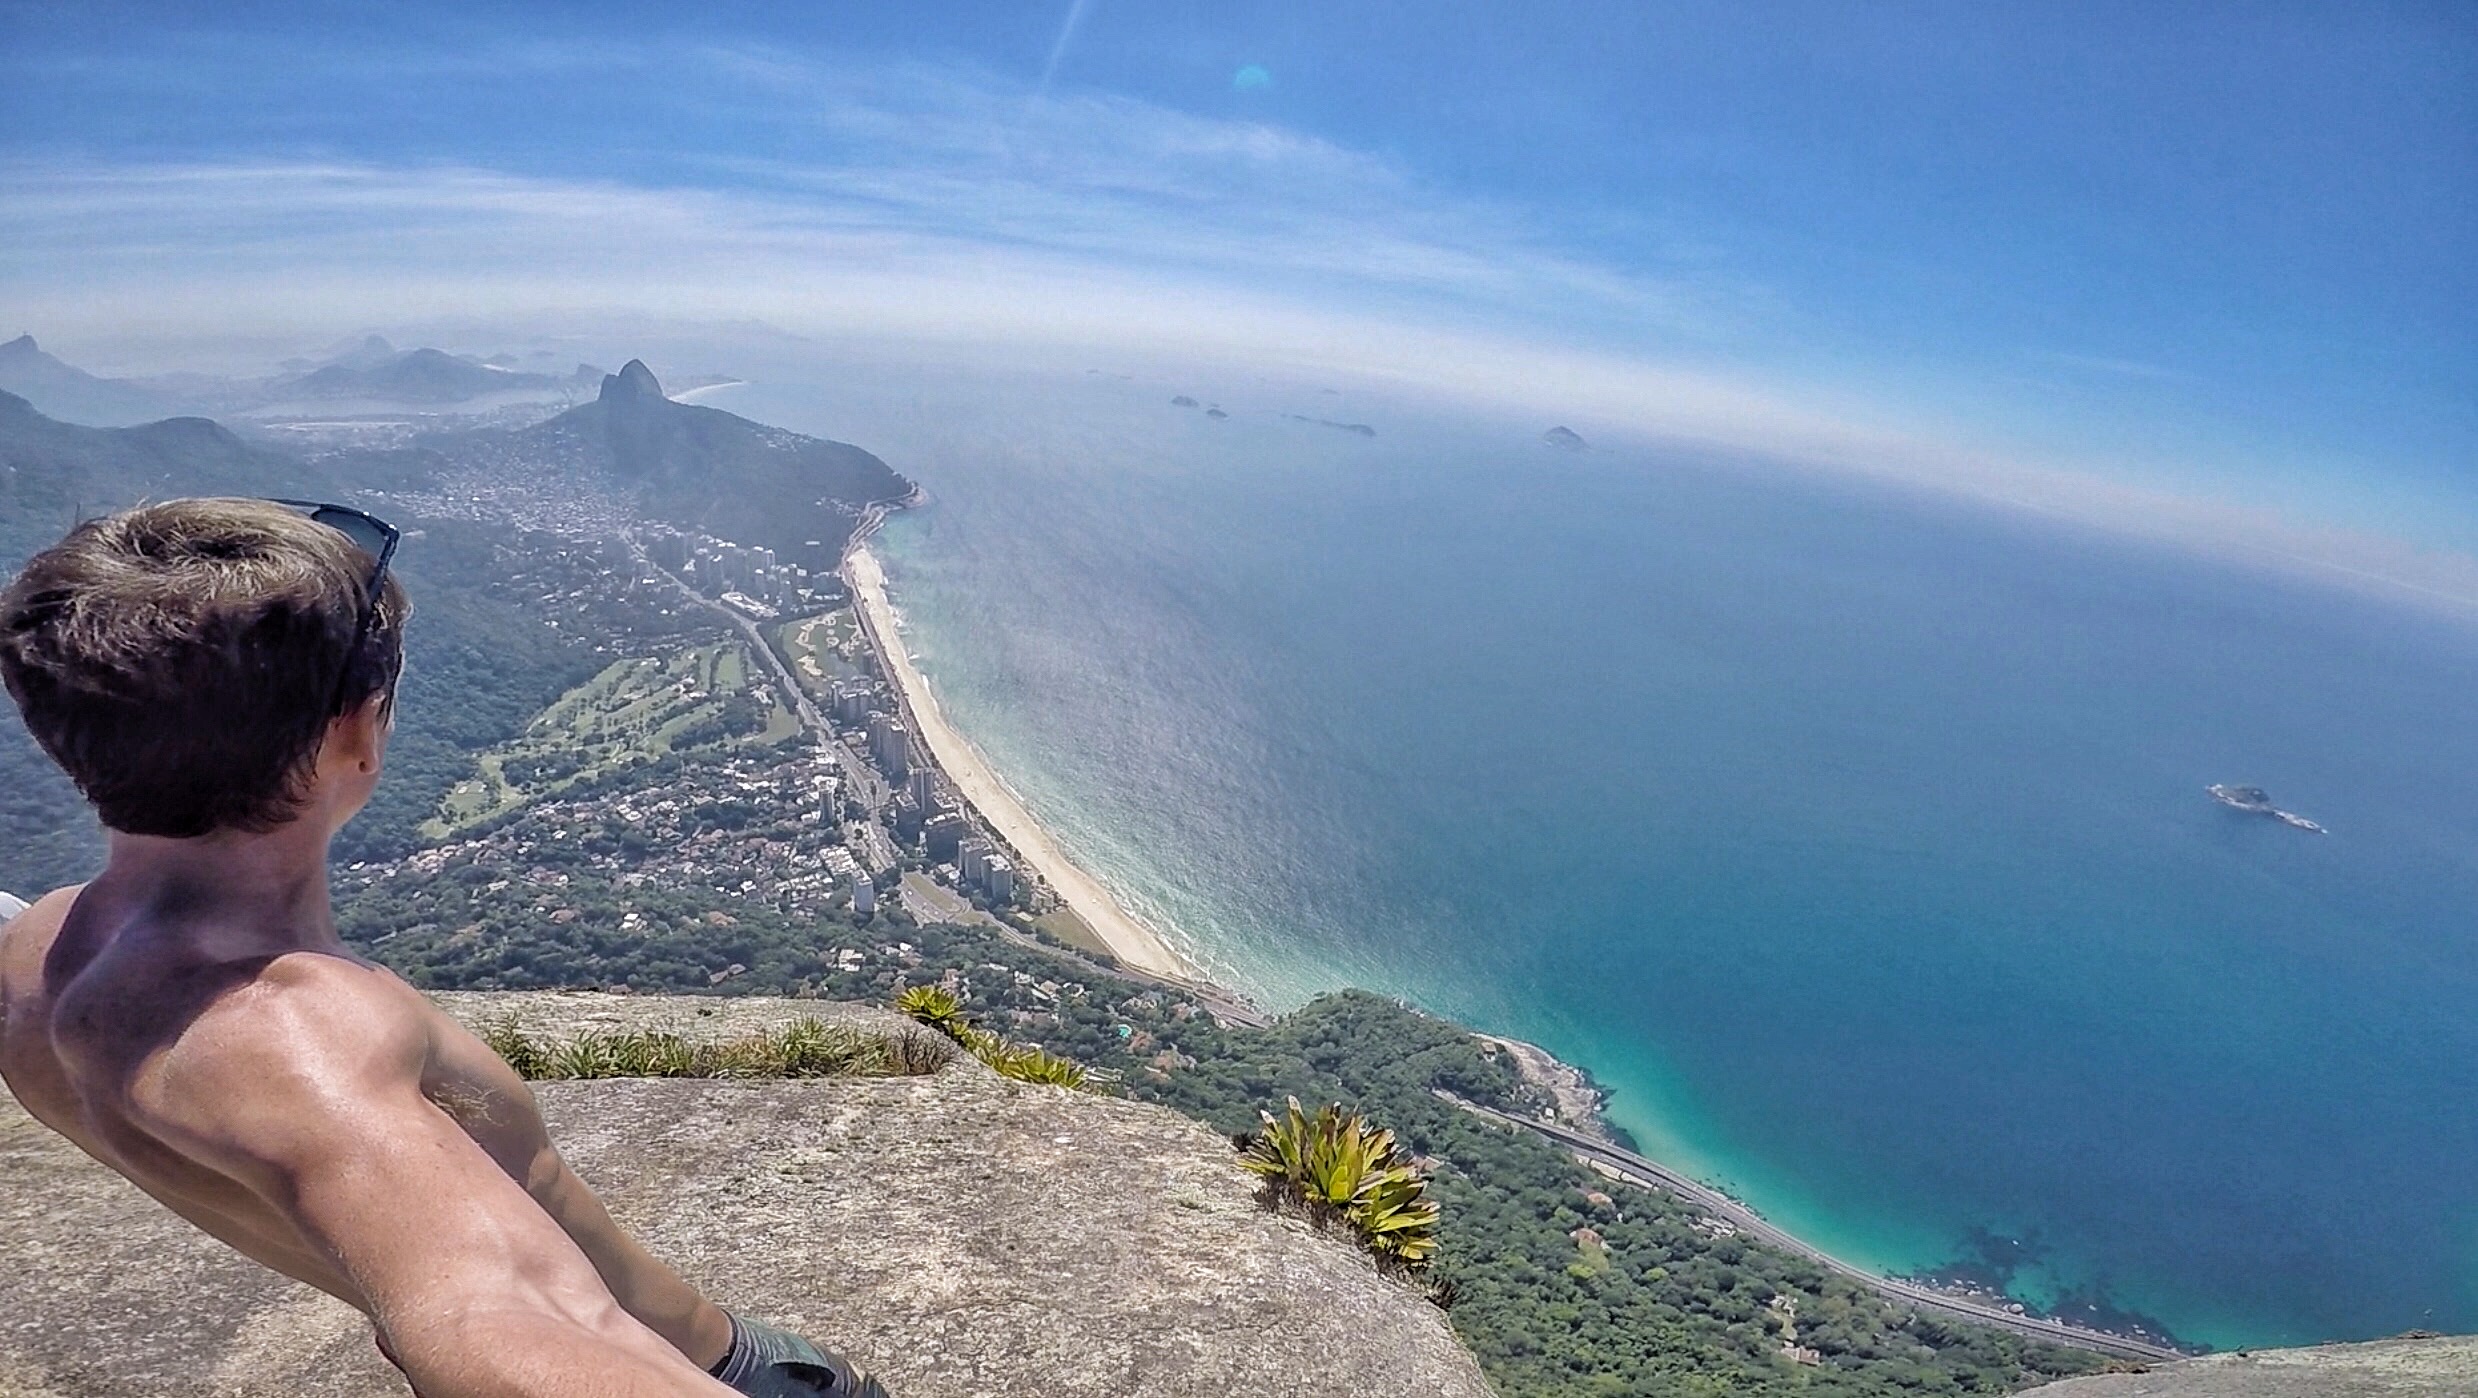 David Simpson from the top of the mountain in Gavea, Brazil. Climbing the wrong mountain, the best mistake I've made